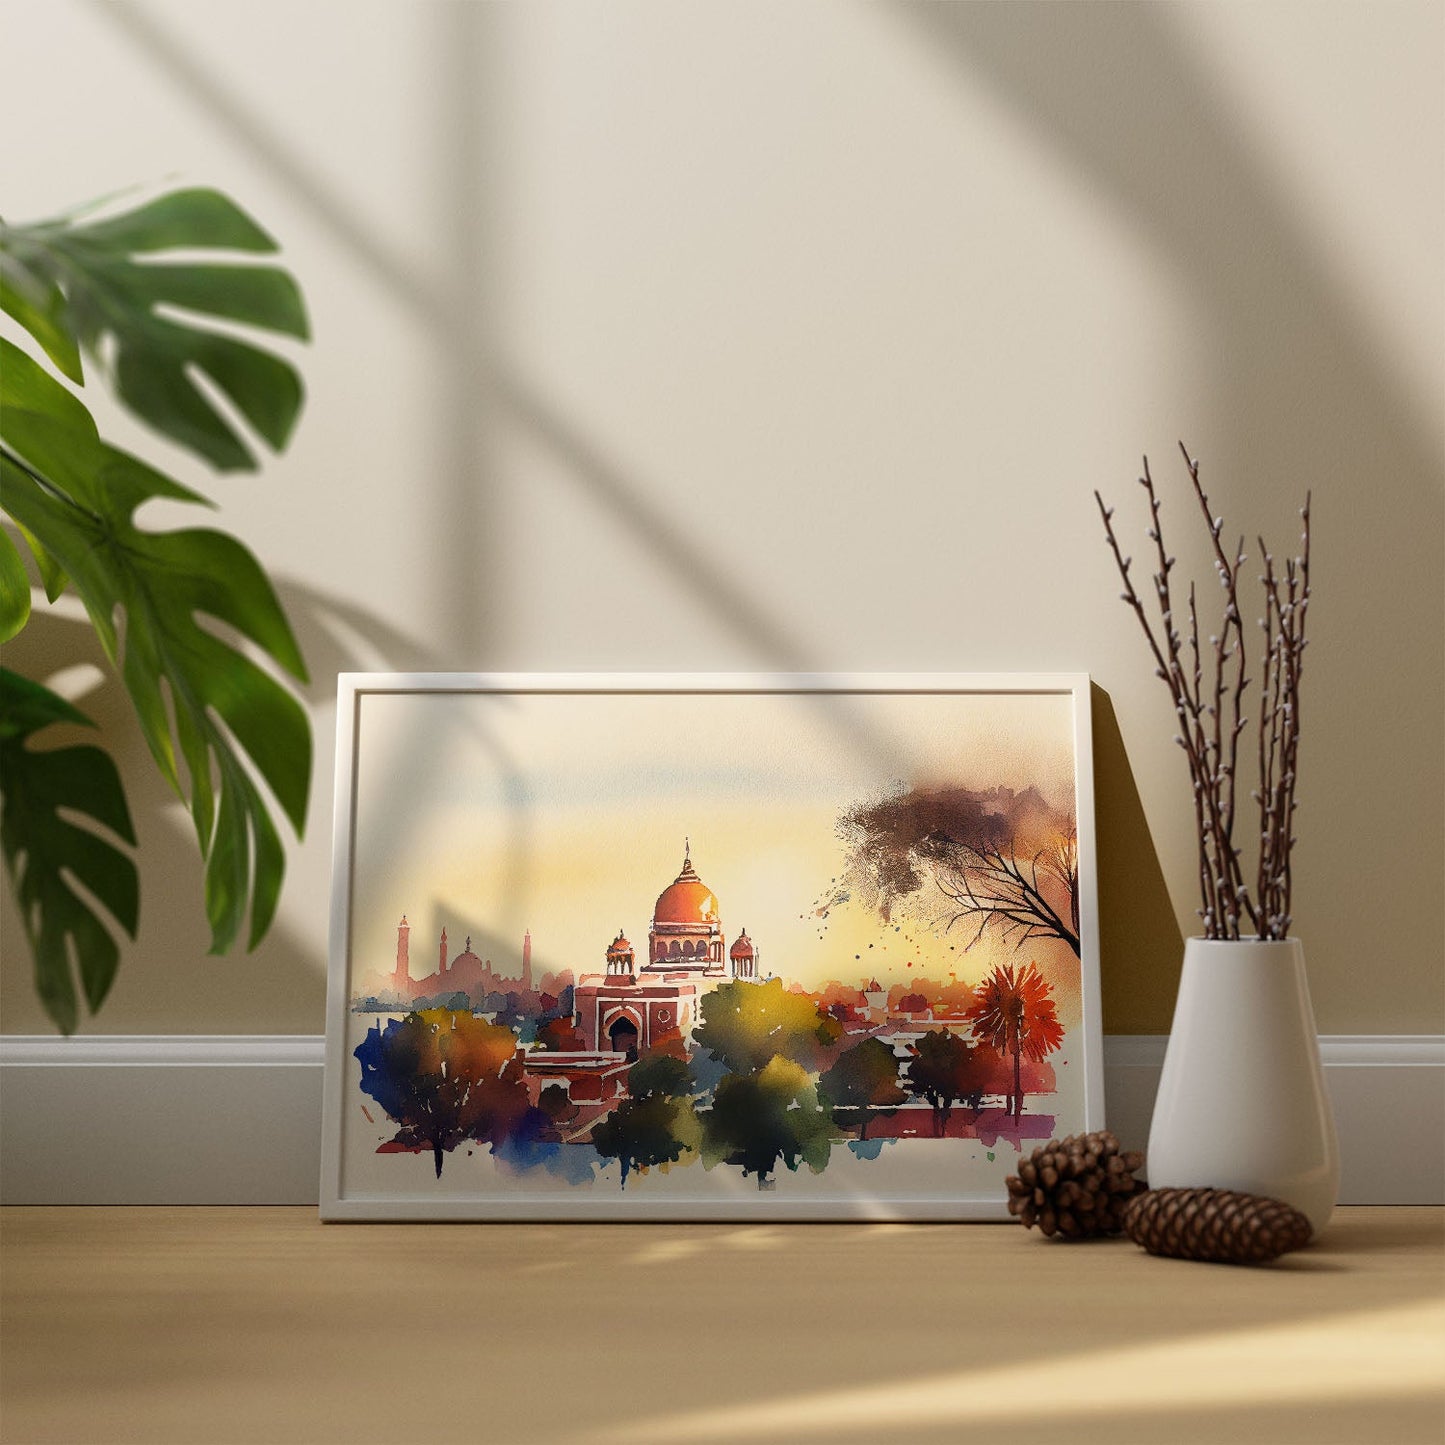 Nacnic watercolor of a skyline of the city of New Delhi. Aesthetic Wall Art Prints for Bedroom or Living Room Design.-Artwork-Nacnic-A4-Sin Marco-Nacnic Estudio SL